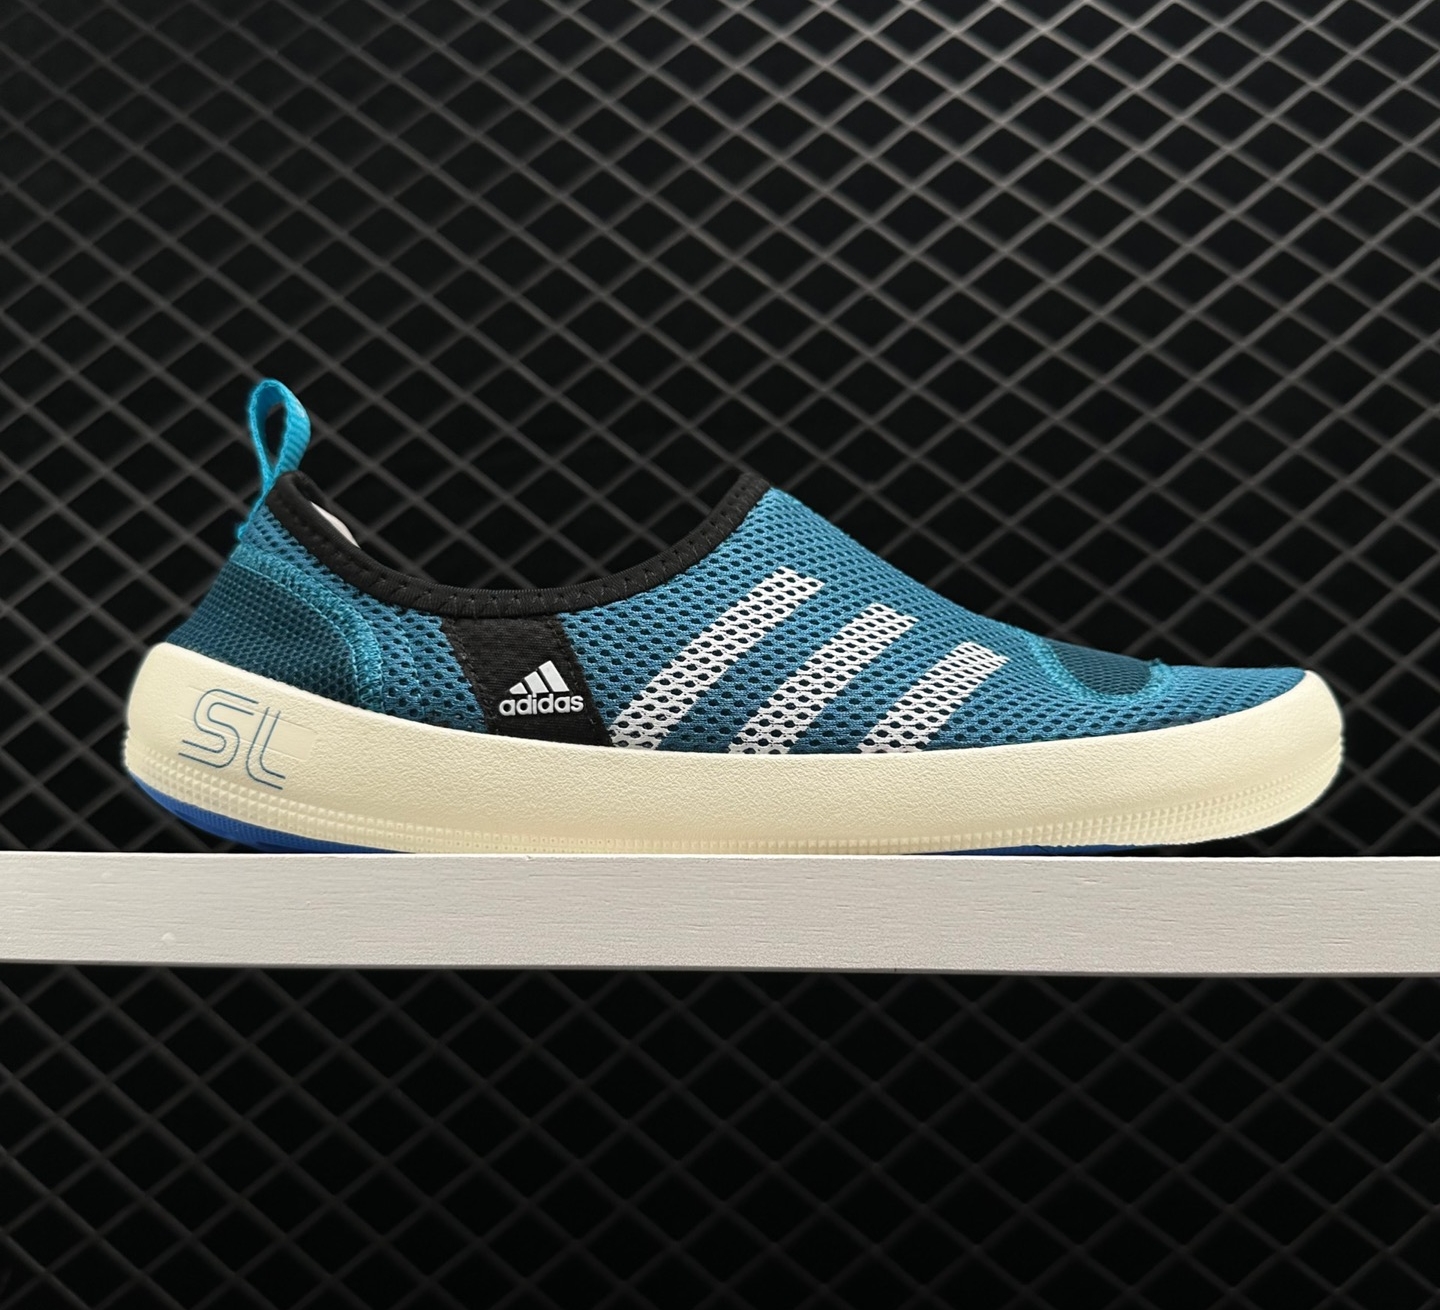 Shop Adidas Climacool Boat SL Blue White G46723 - Lightweight and Breathable Shoes | Free Shipping (Max characters: 80)